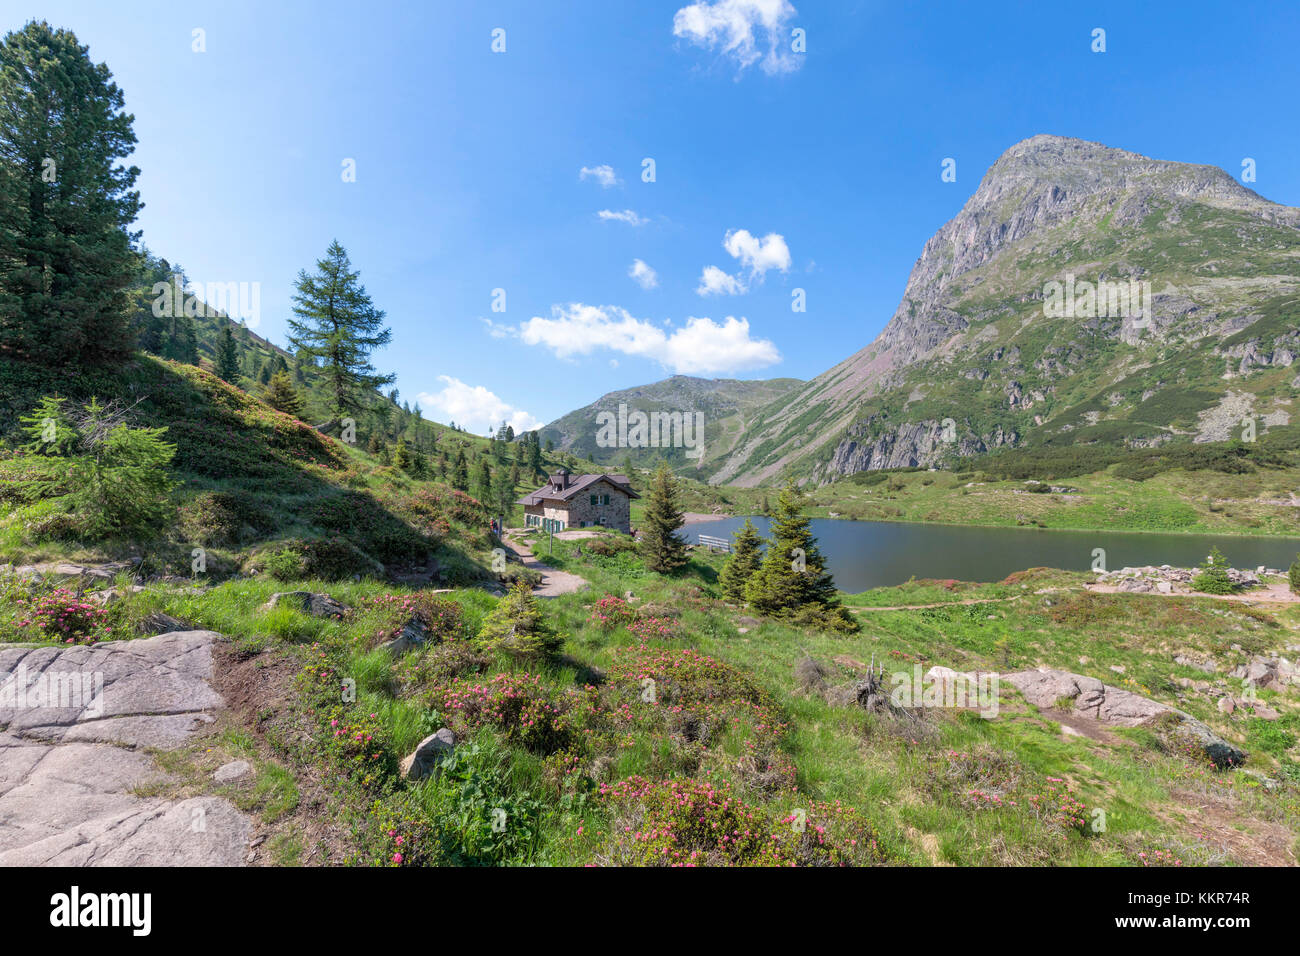 Europe, Italy, Trentino, Trento, Lagorai chain, the Colbricon lakes in summer with the little alpine hut near the lakes Stock Photo